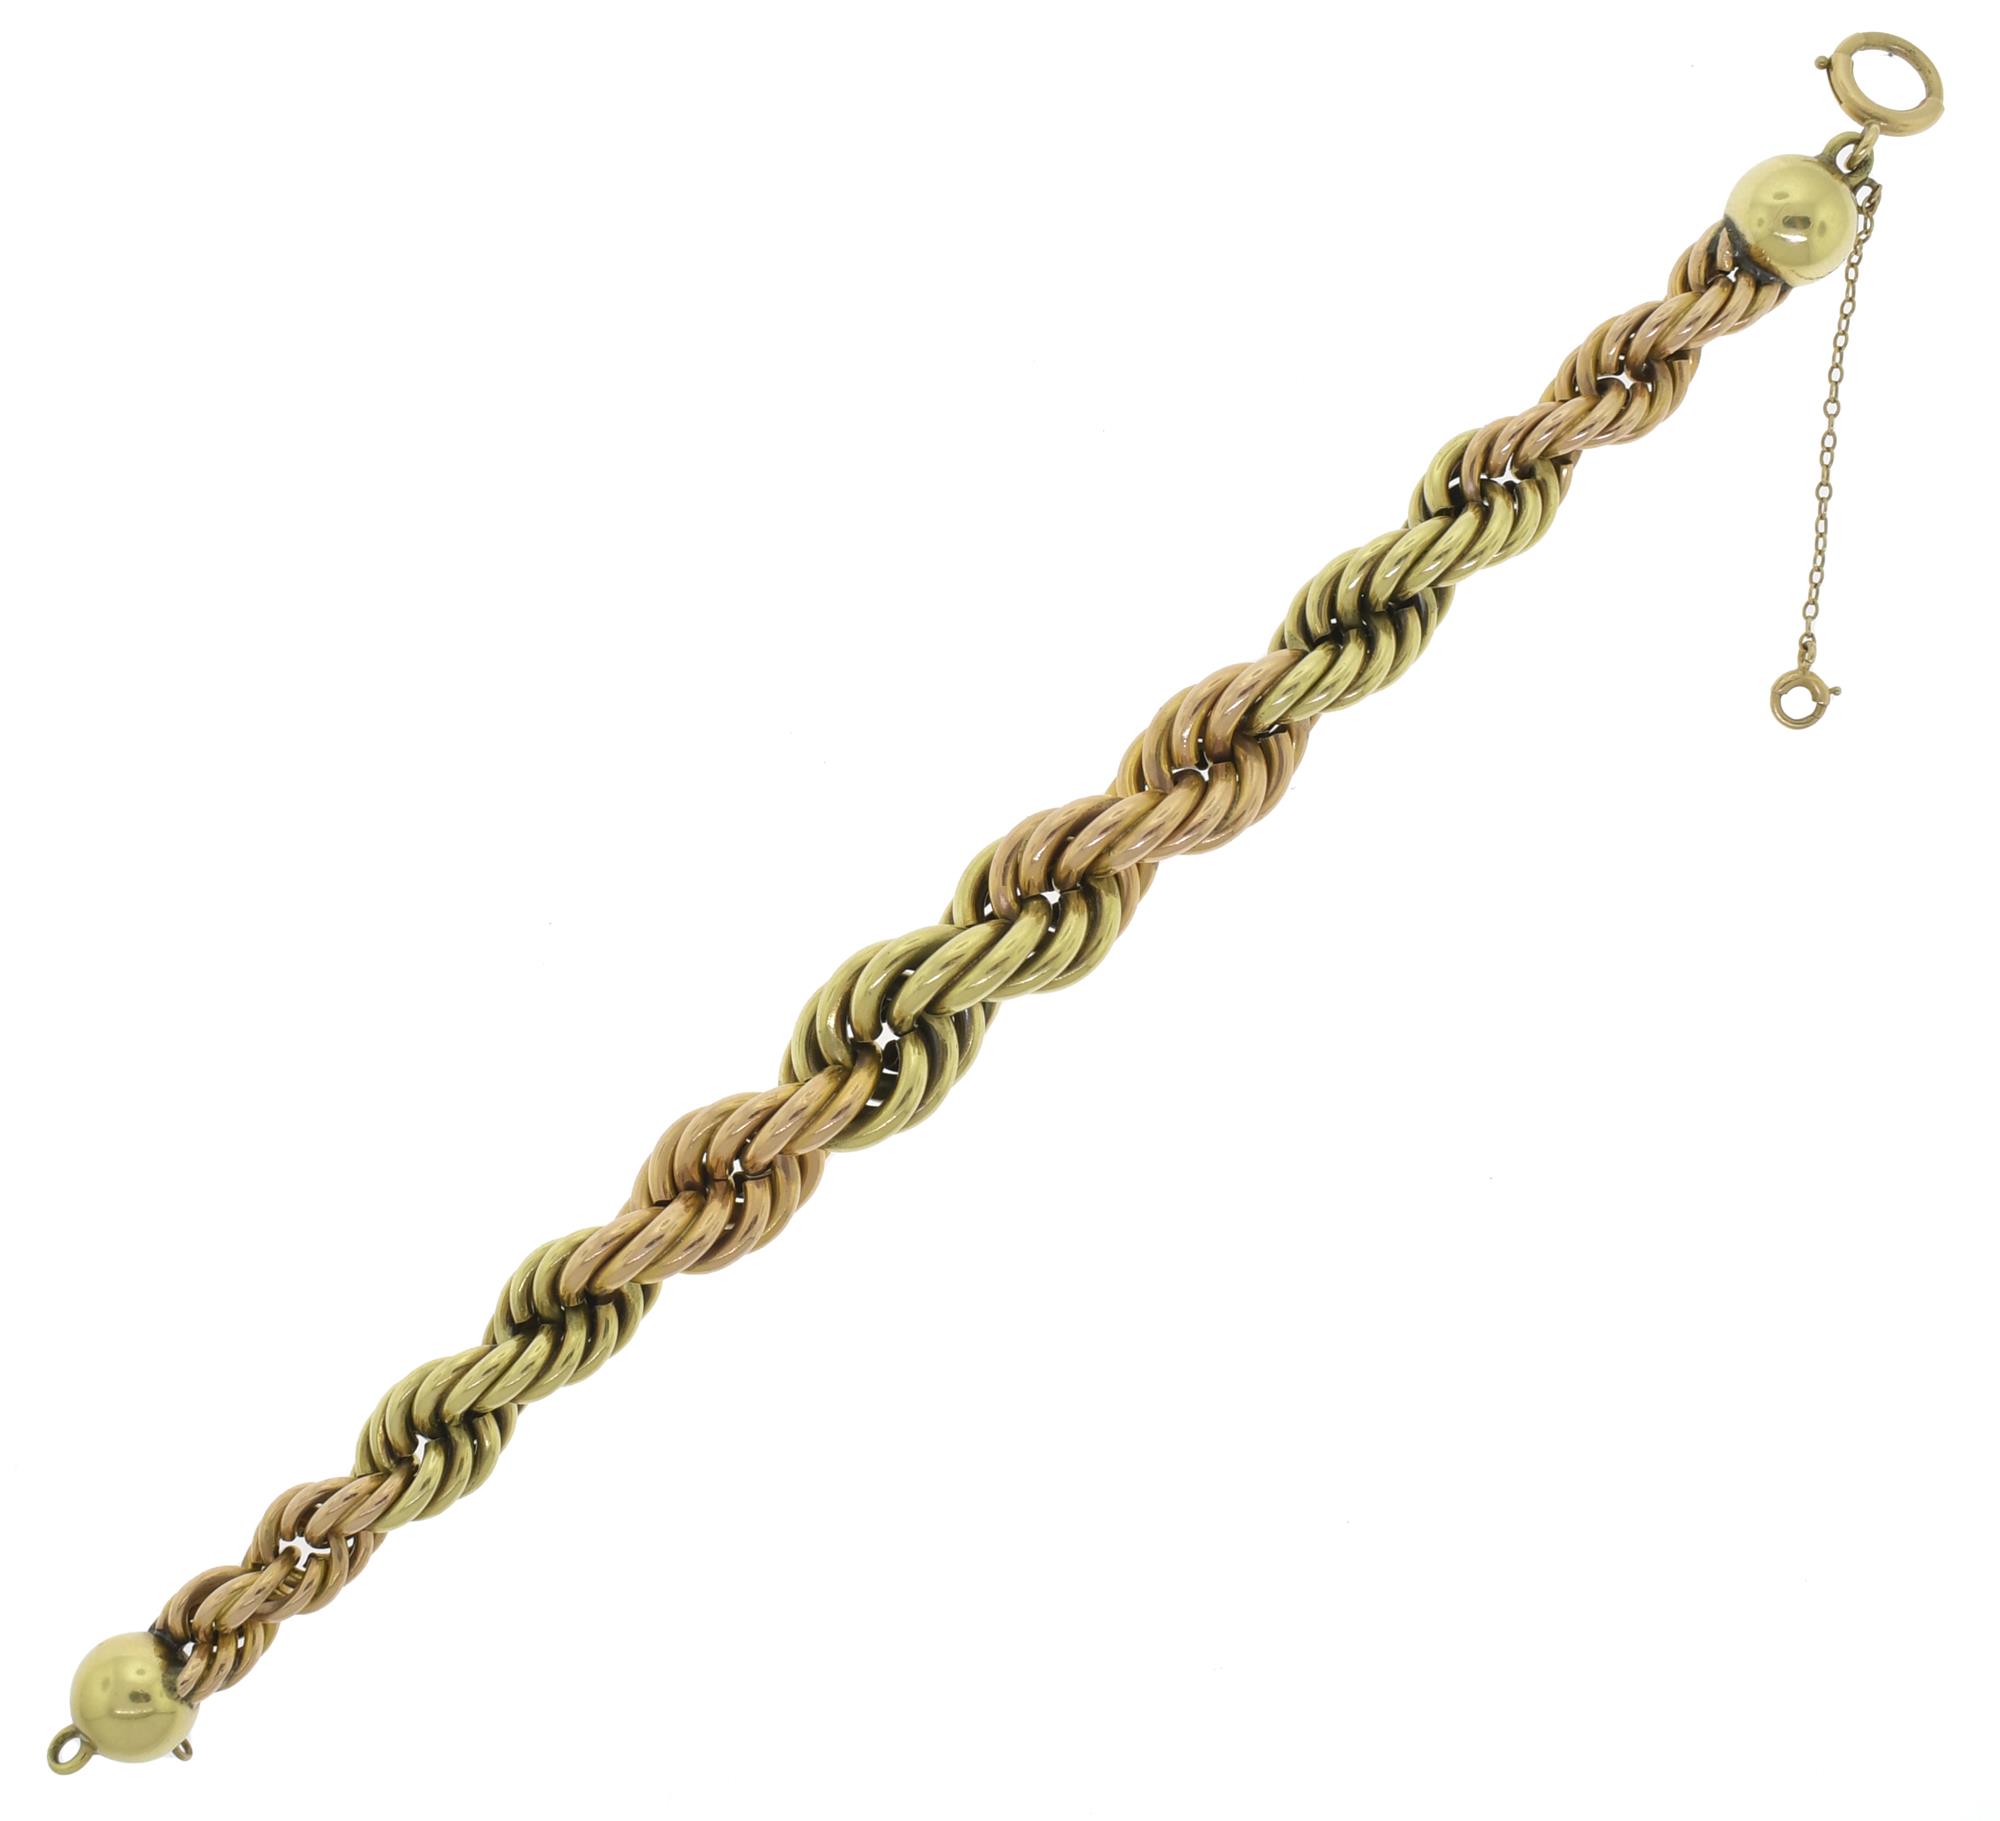 14K YELLOW AND ROSE GOLD ROPE BRACELET  3ac84d